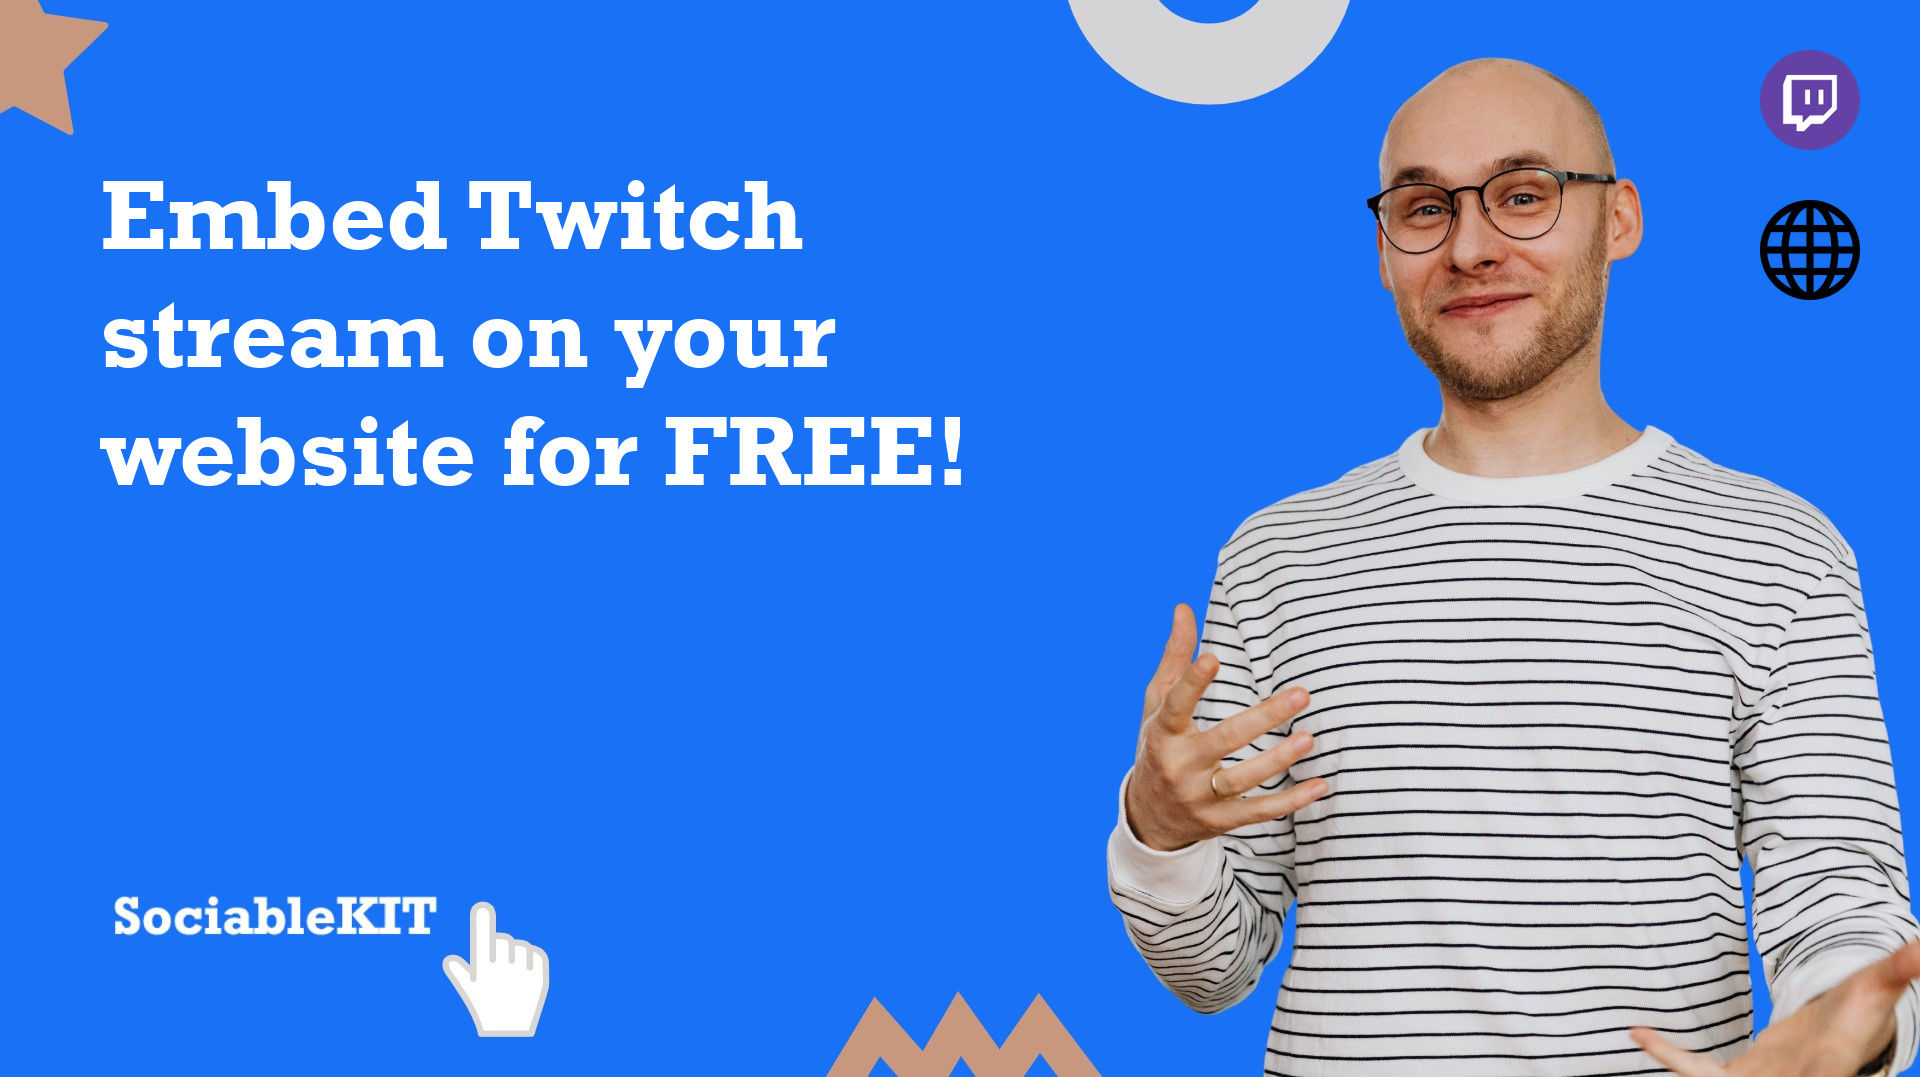 Twitch: Live Game Streaming – Apps on Google Play